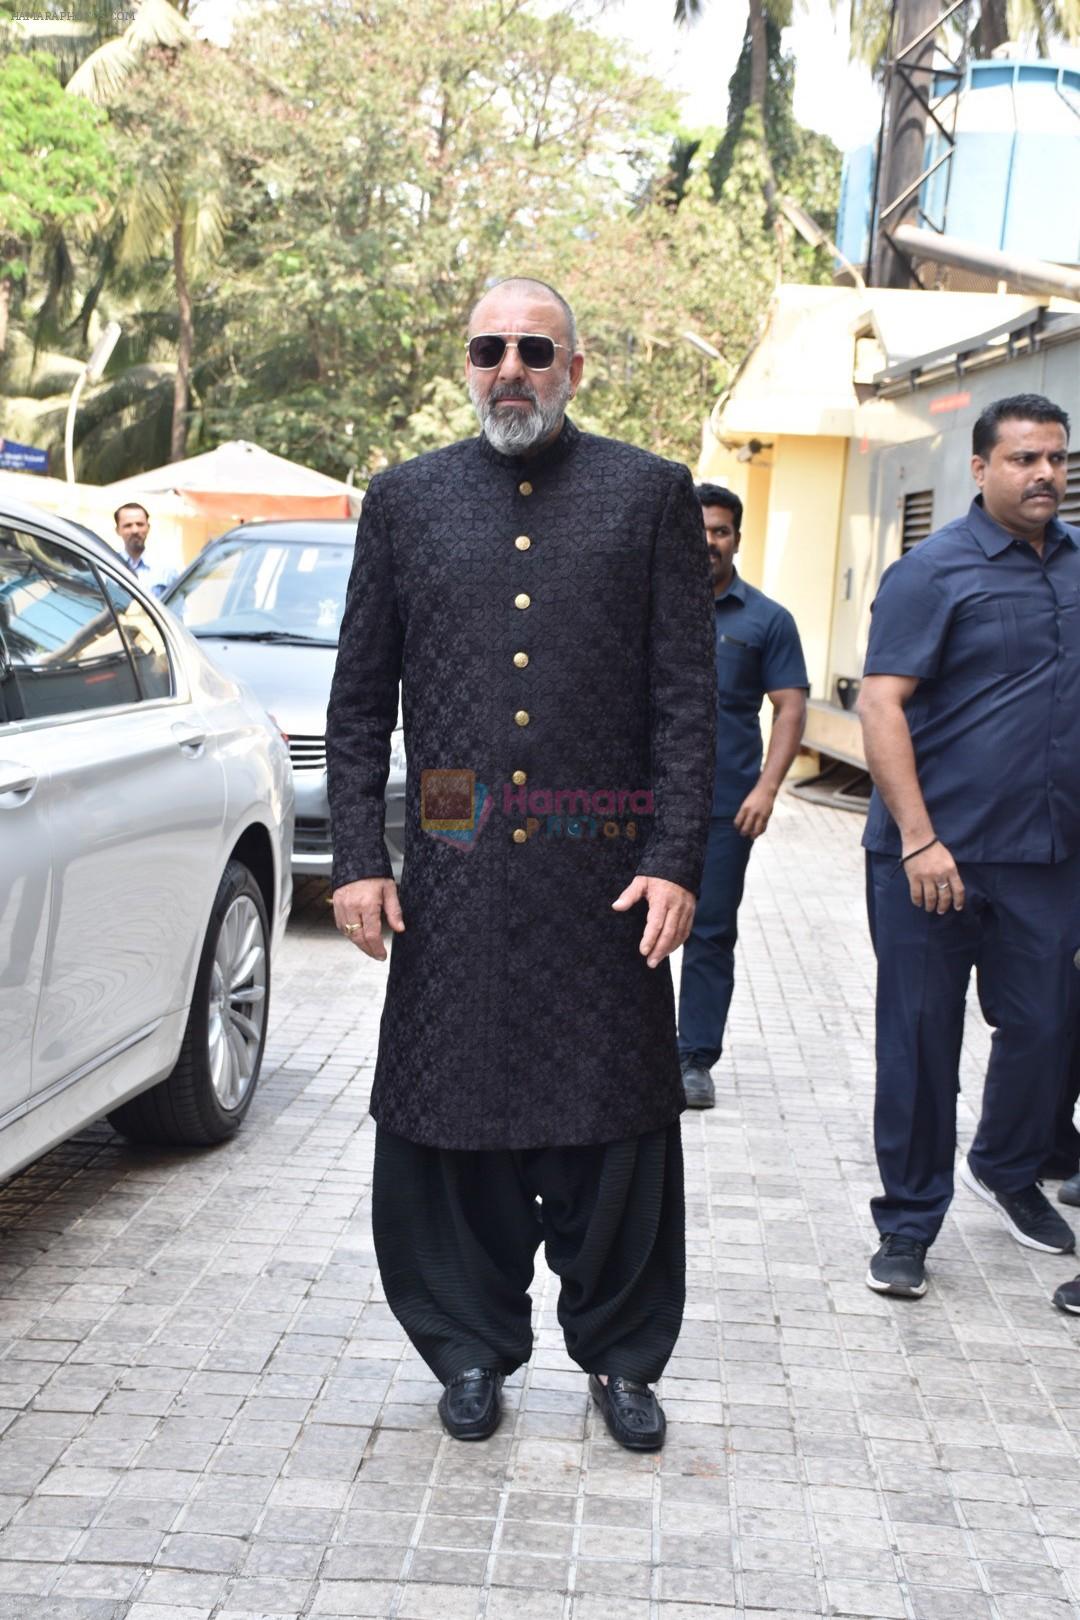 Sanjay Dutt at the Teaser launch of KALANK on 11th March 2019